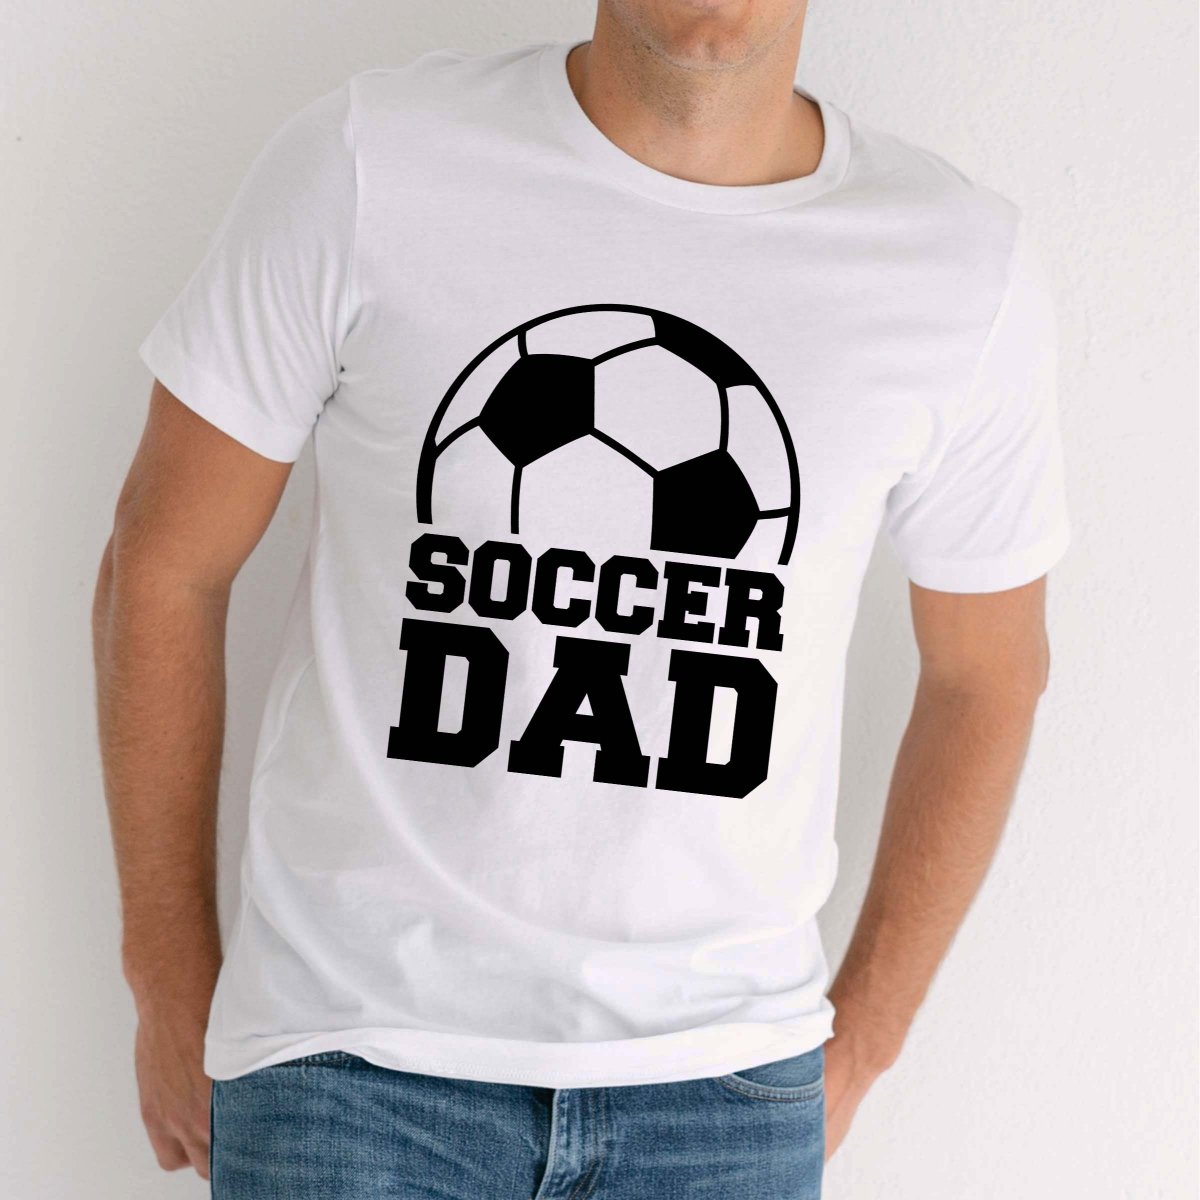 Soccer Dad Tee - Limeberry Designs